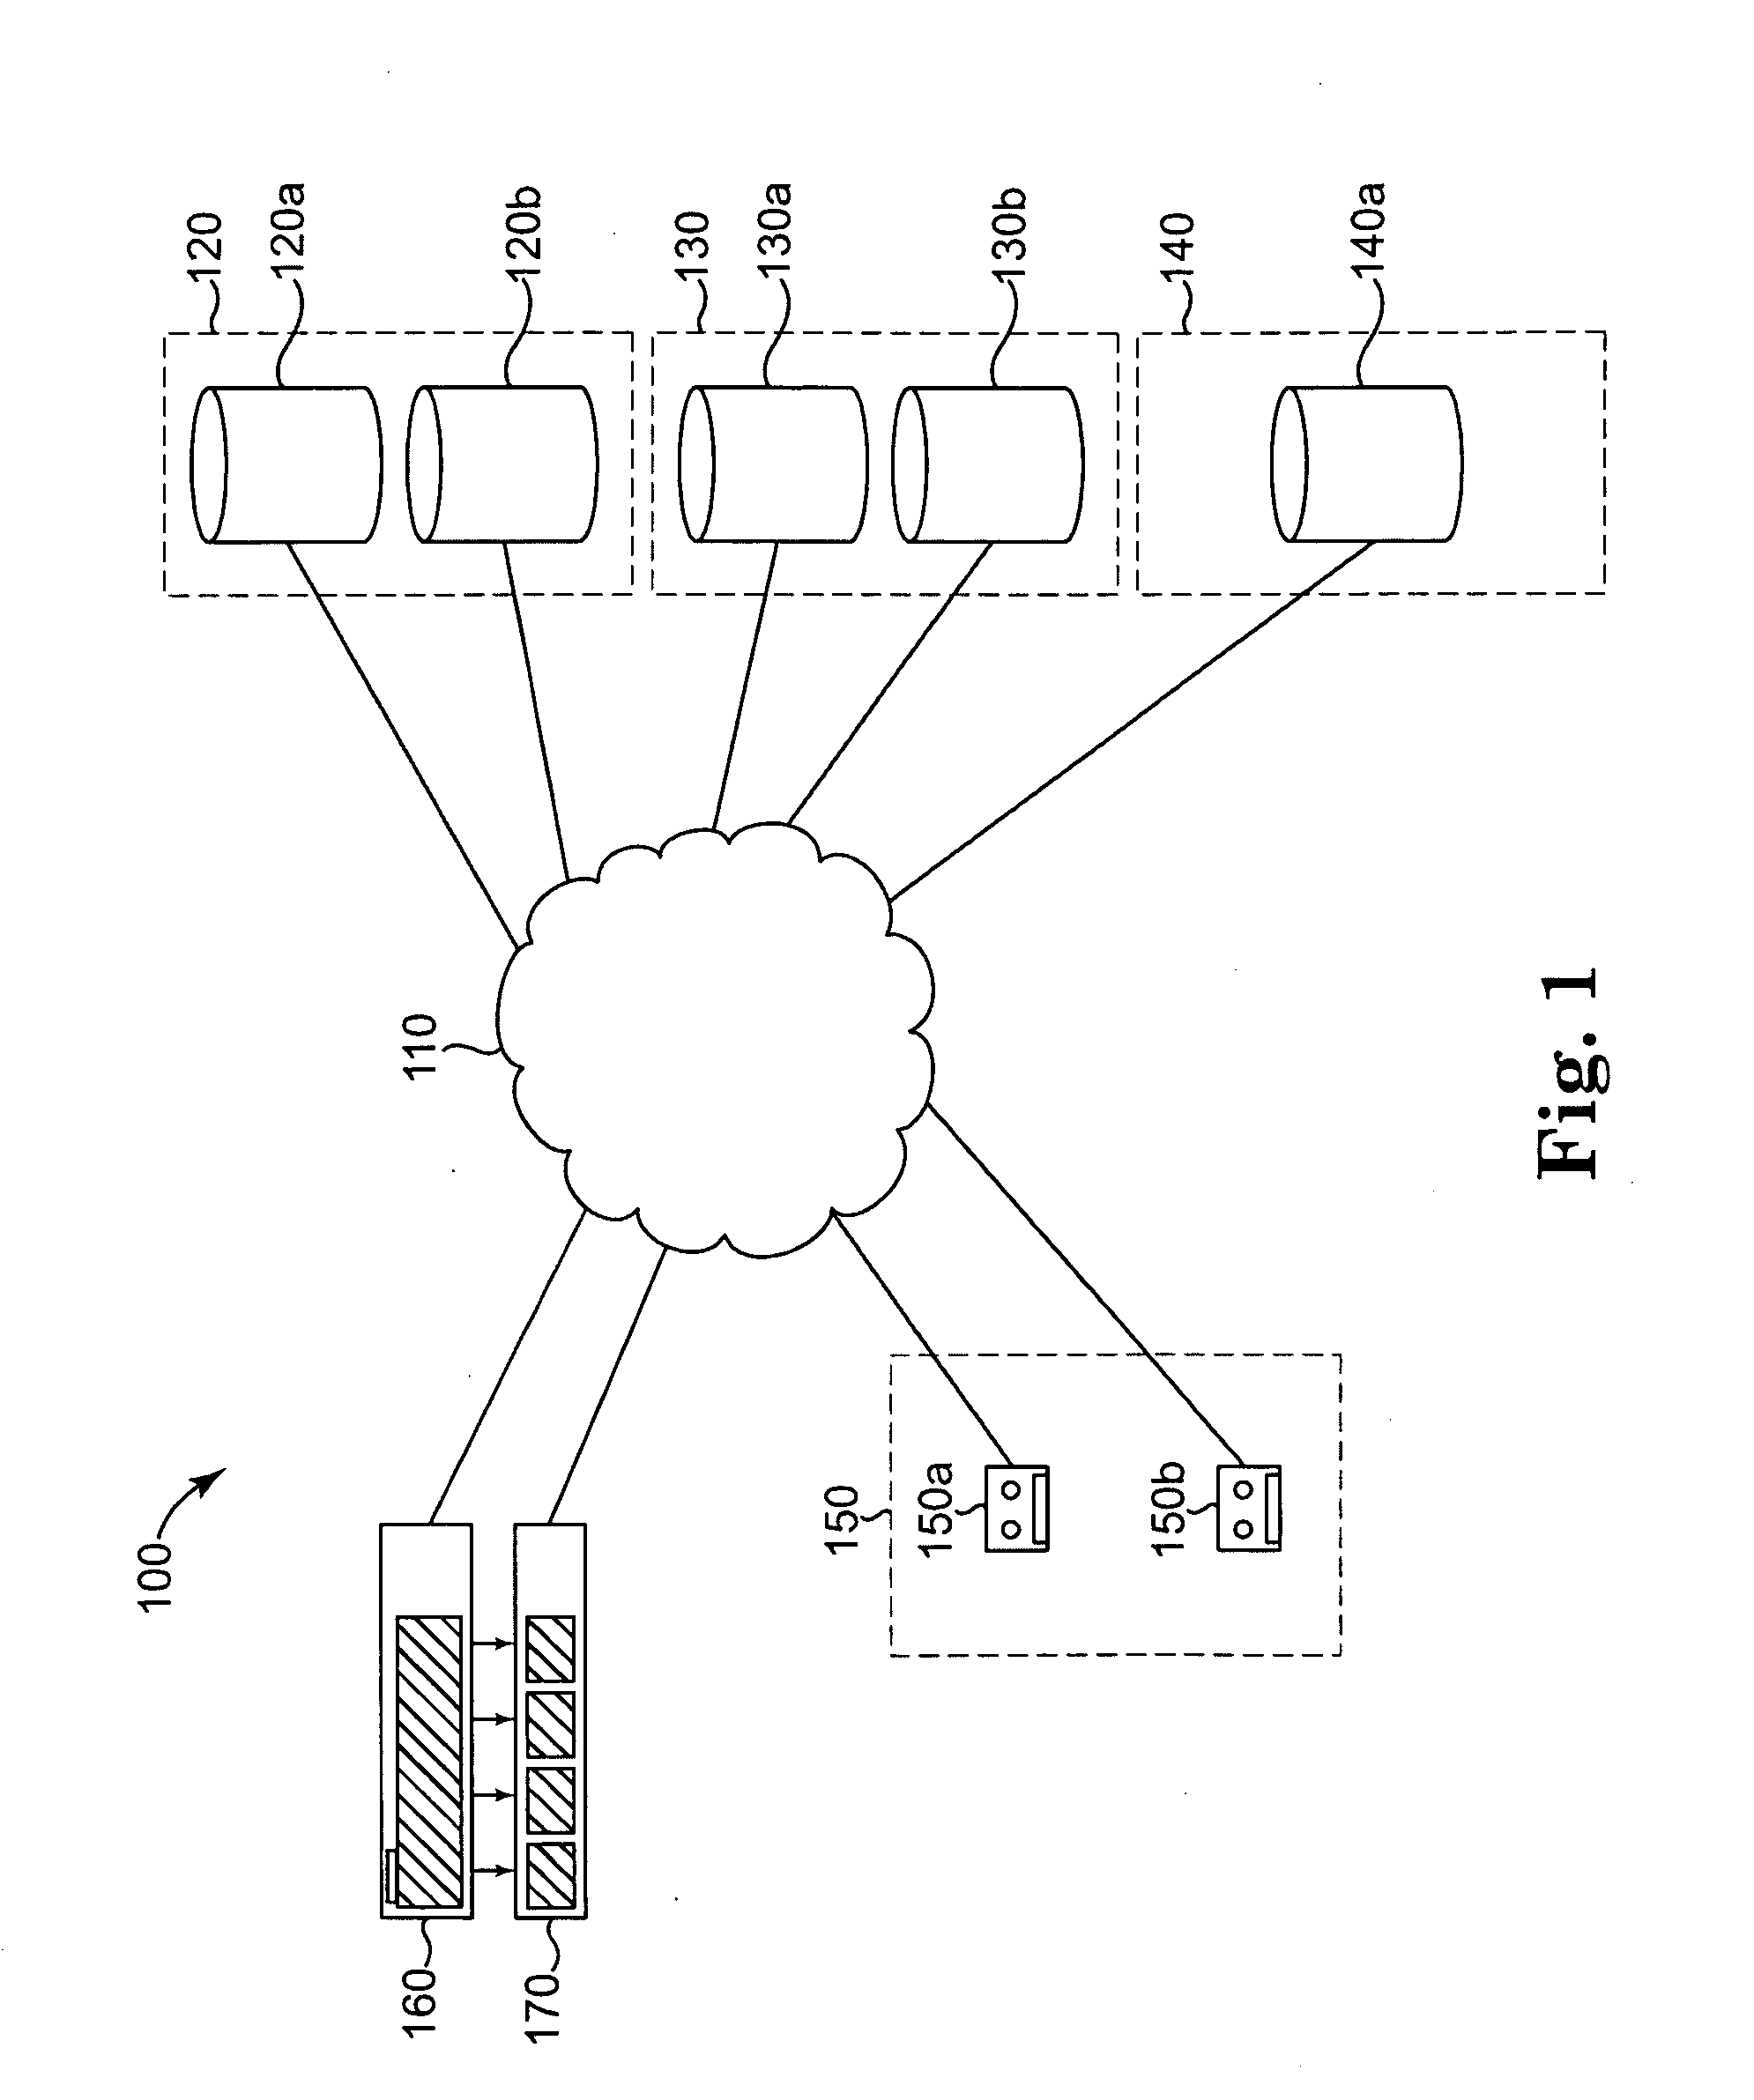 Optimized simultaneous storing of data into deduplicated and non-deduplicated storage pools